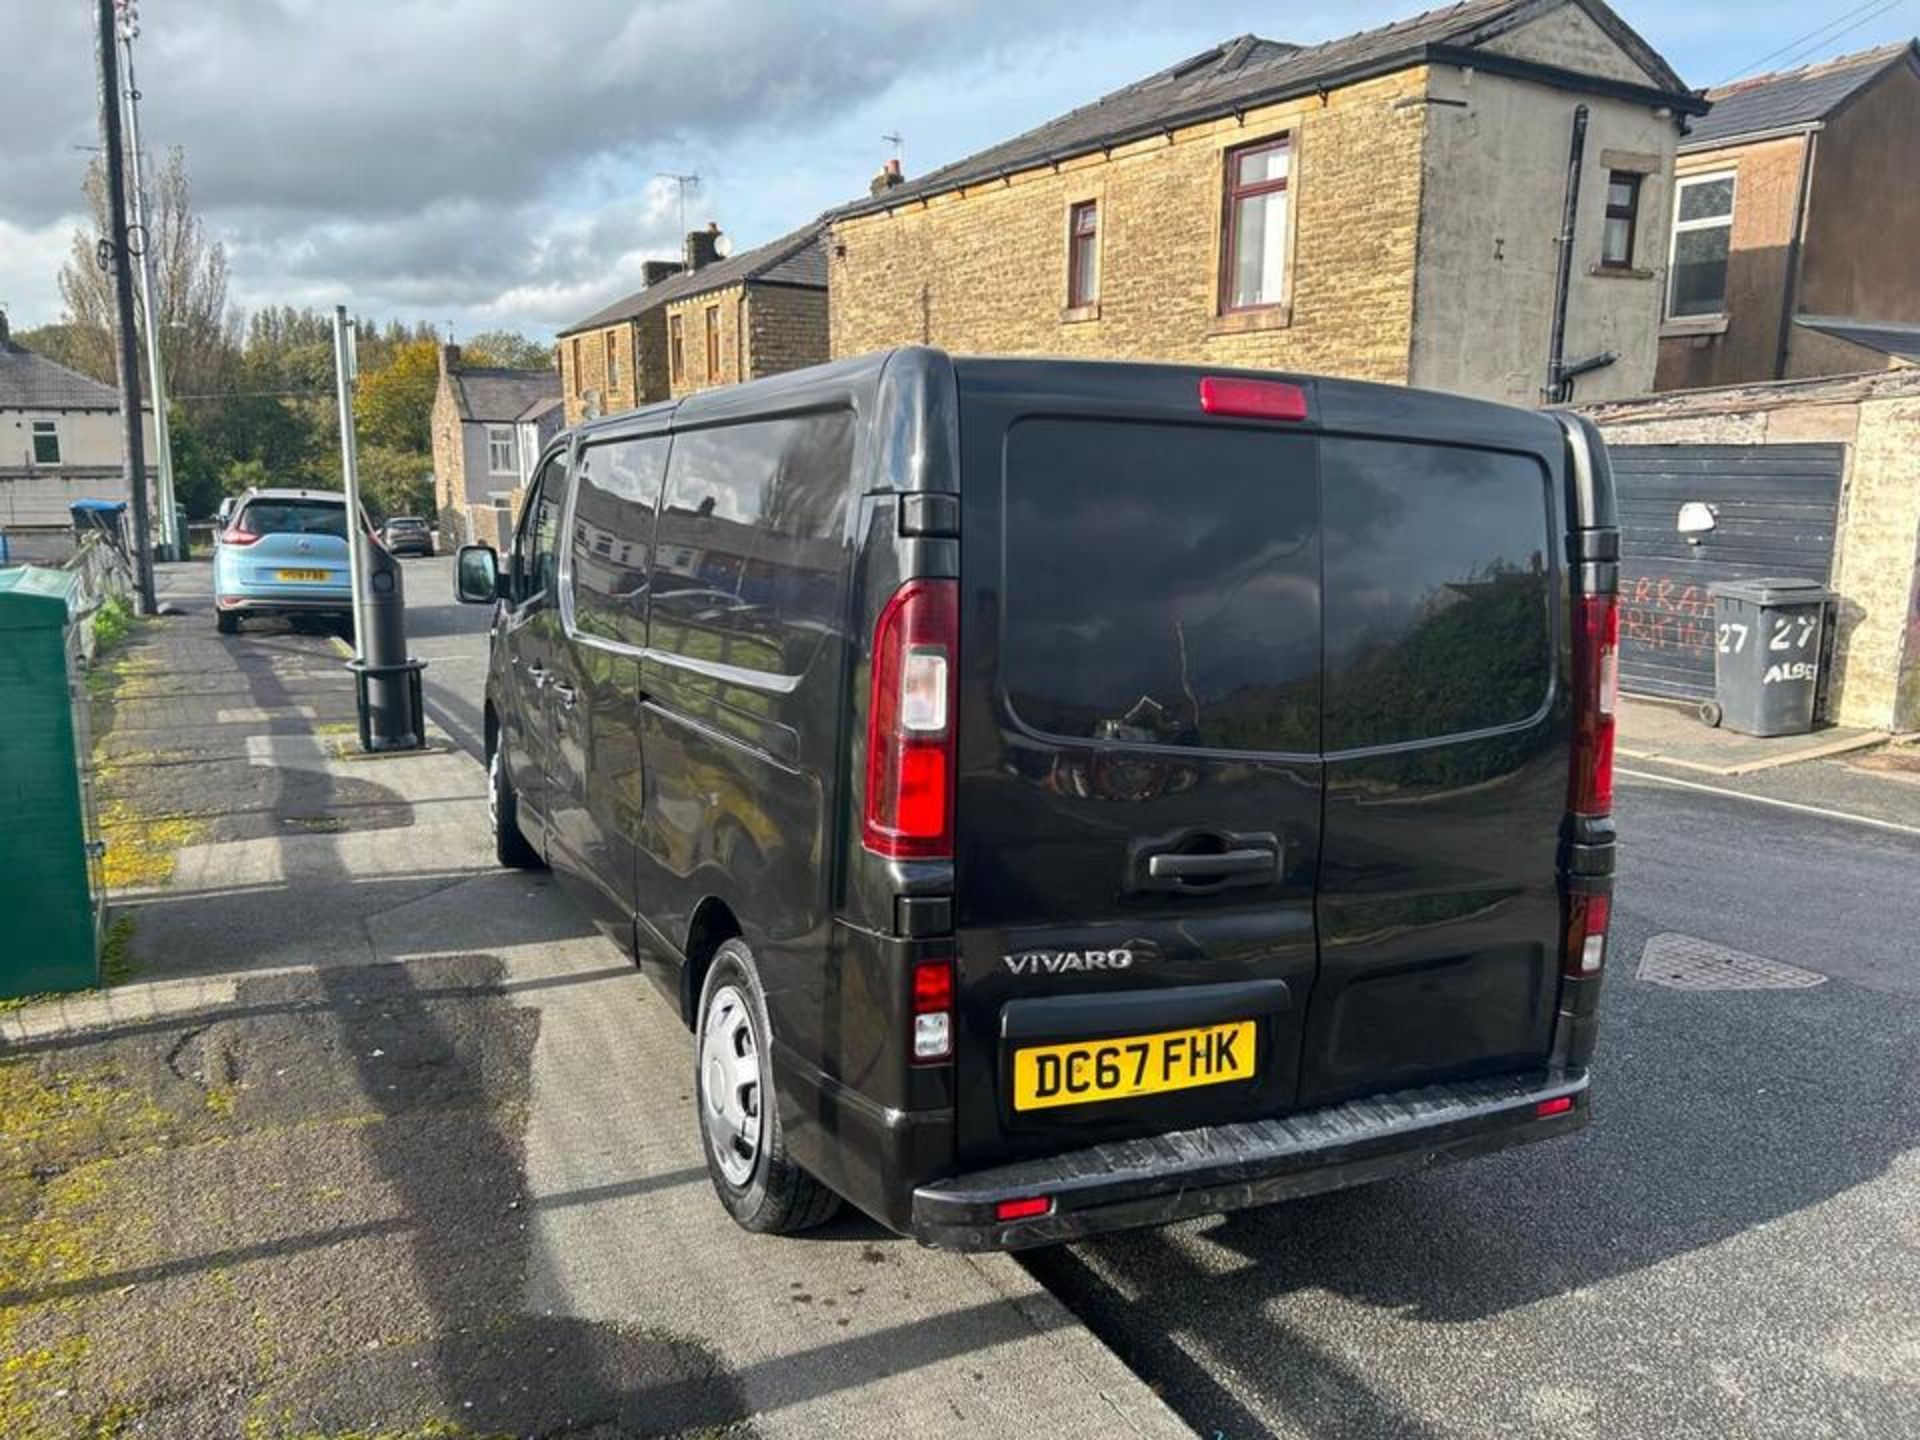 2018 VAUXHALL VIVARO SPORTIVE -128K MILES- HPI CLEAR - READY FOR ADVENTURE! - Image 2 of 11